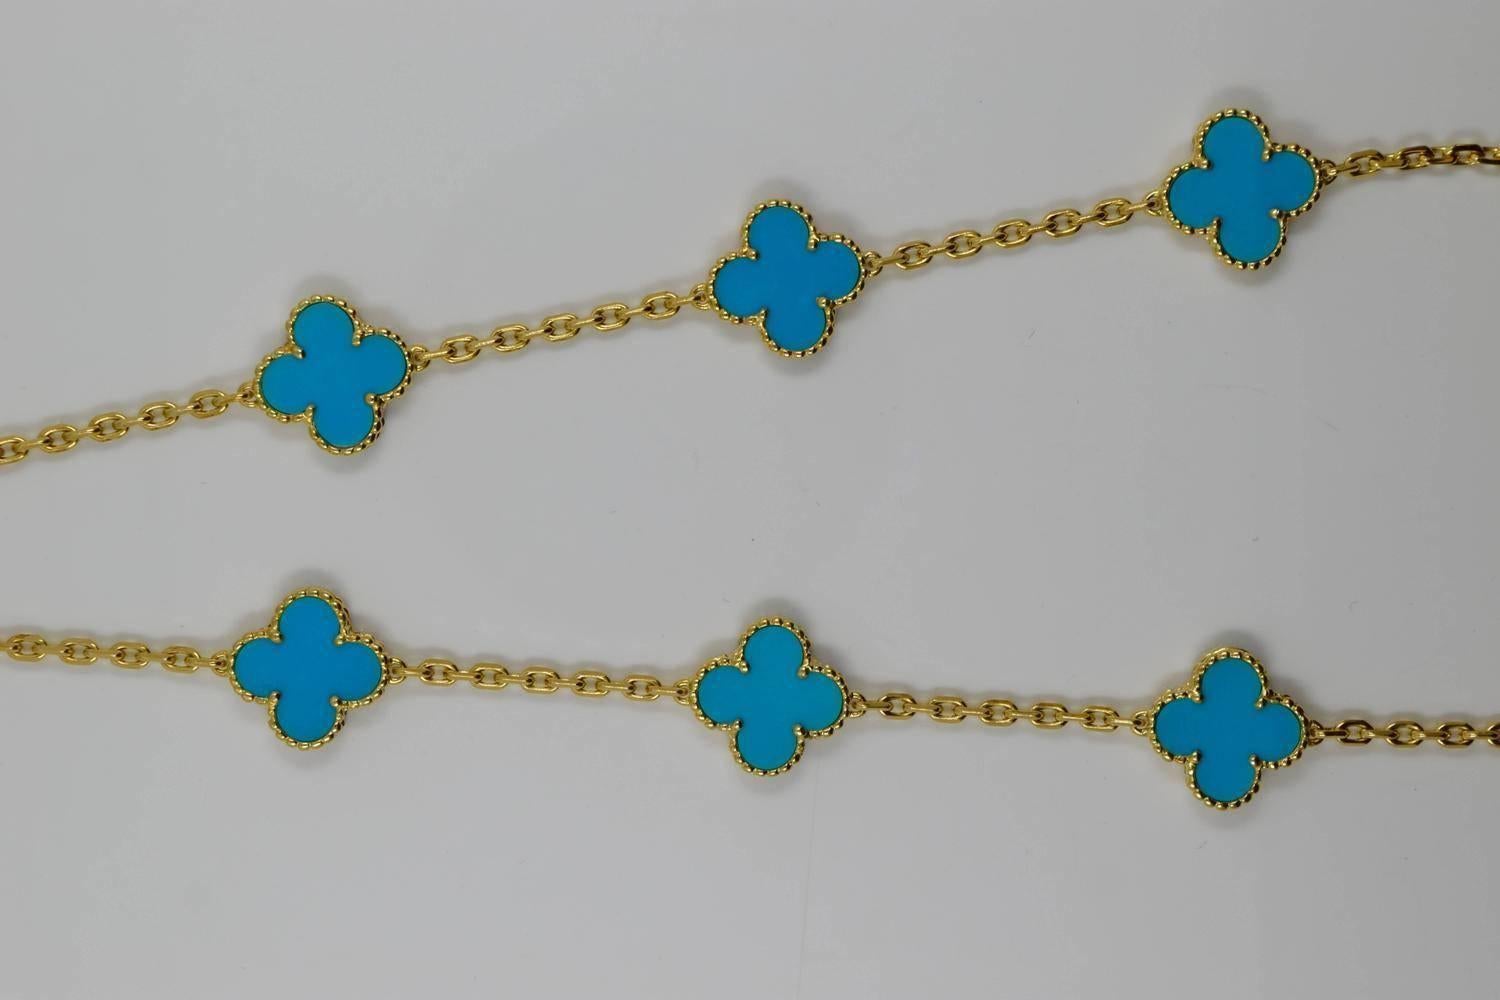 Van Cleef & Arpels Turquoise Motif Alhambra Necklace 18k

About the Item:
Faithful to the very first Alhambra jewel created in 1968, the Vintage Alhambra creations are distinguished by their unique, timeless elegance.
The Turquoise stones that